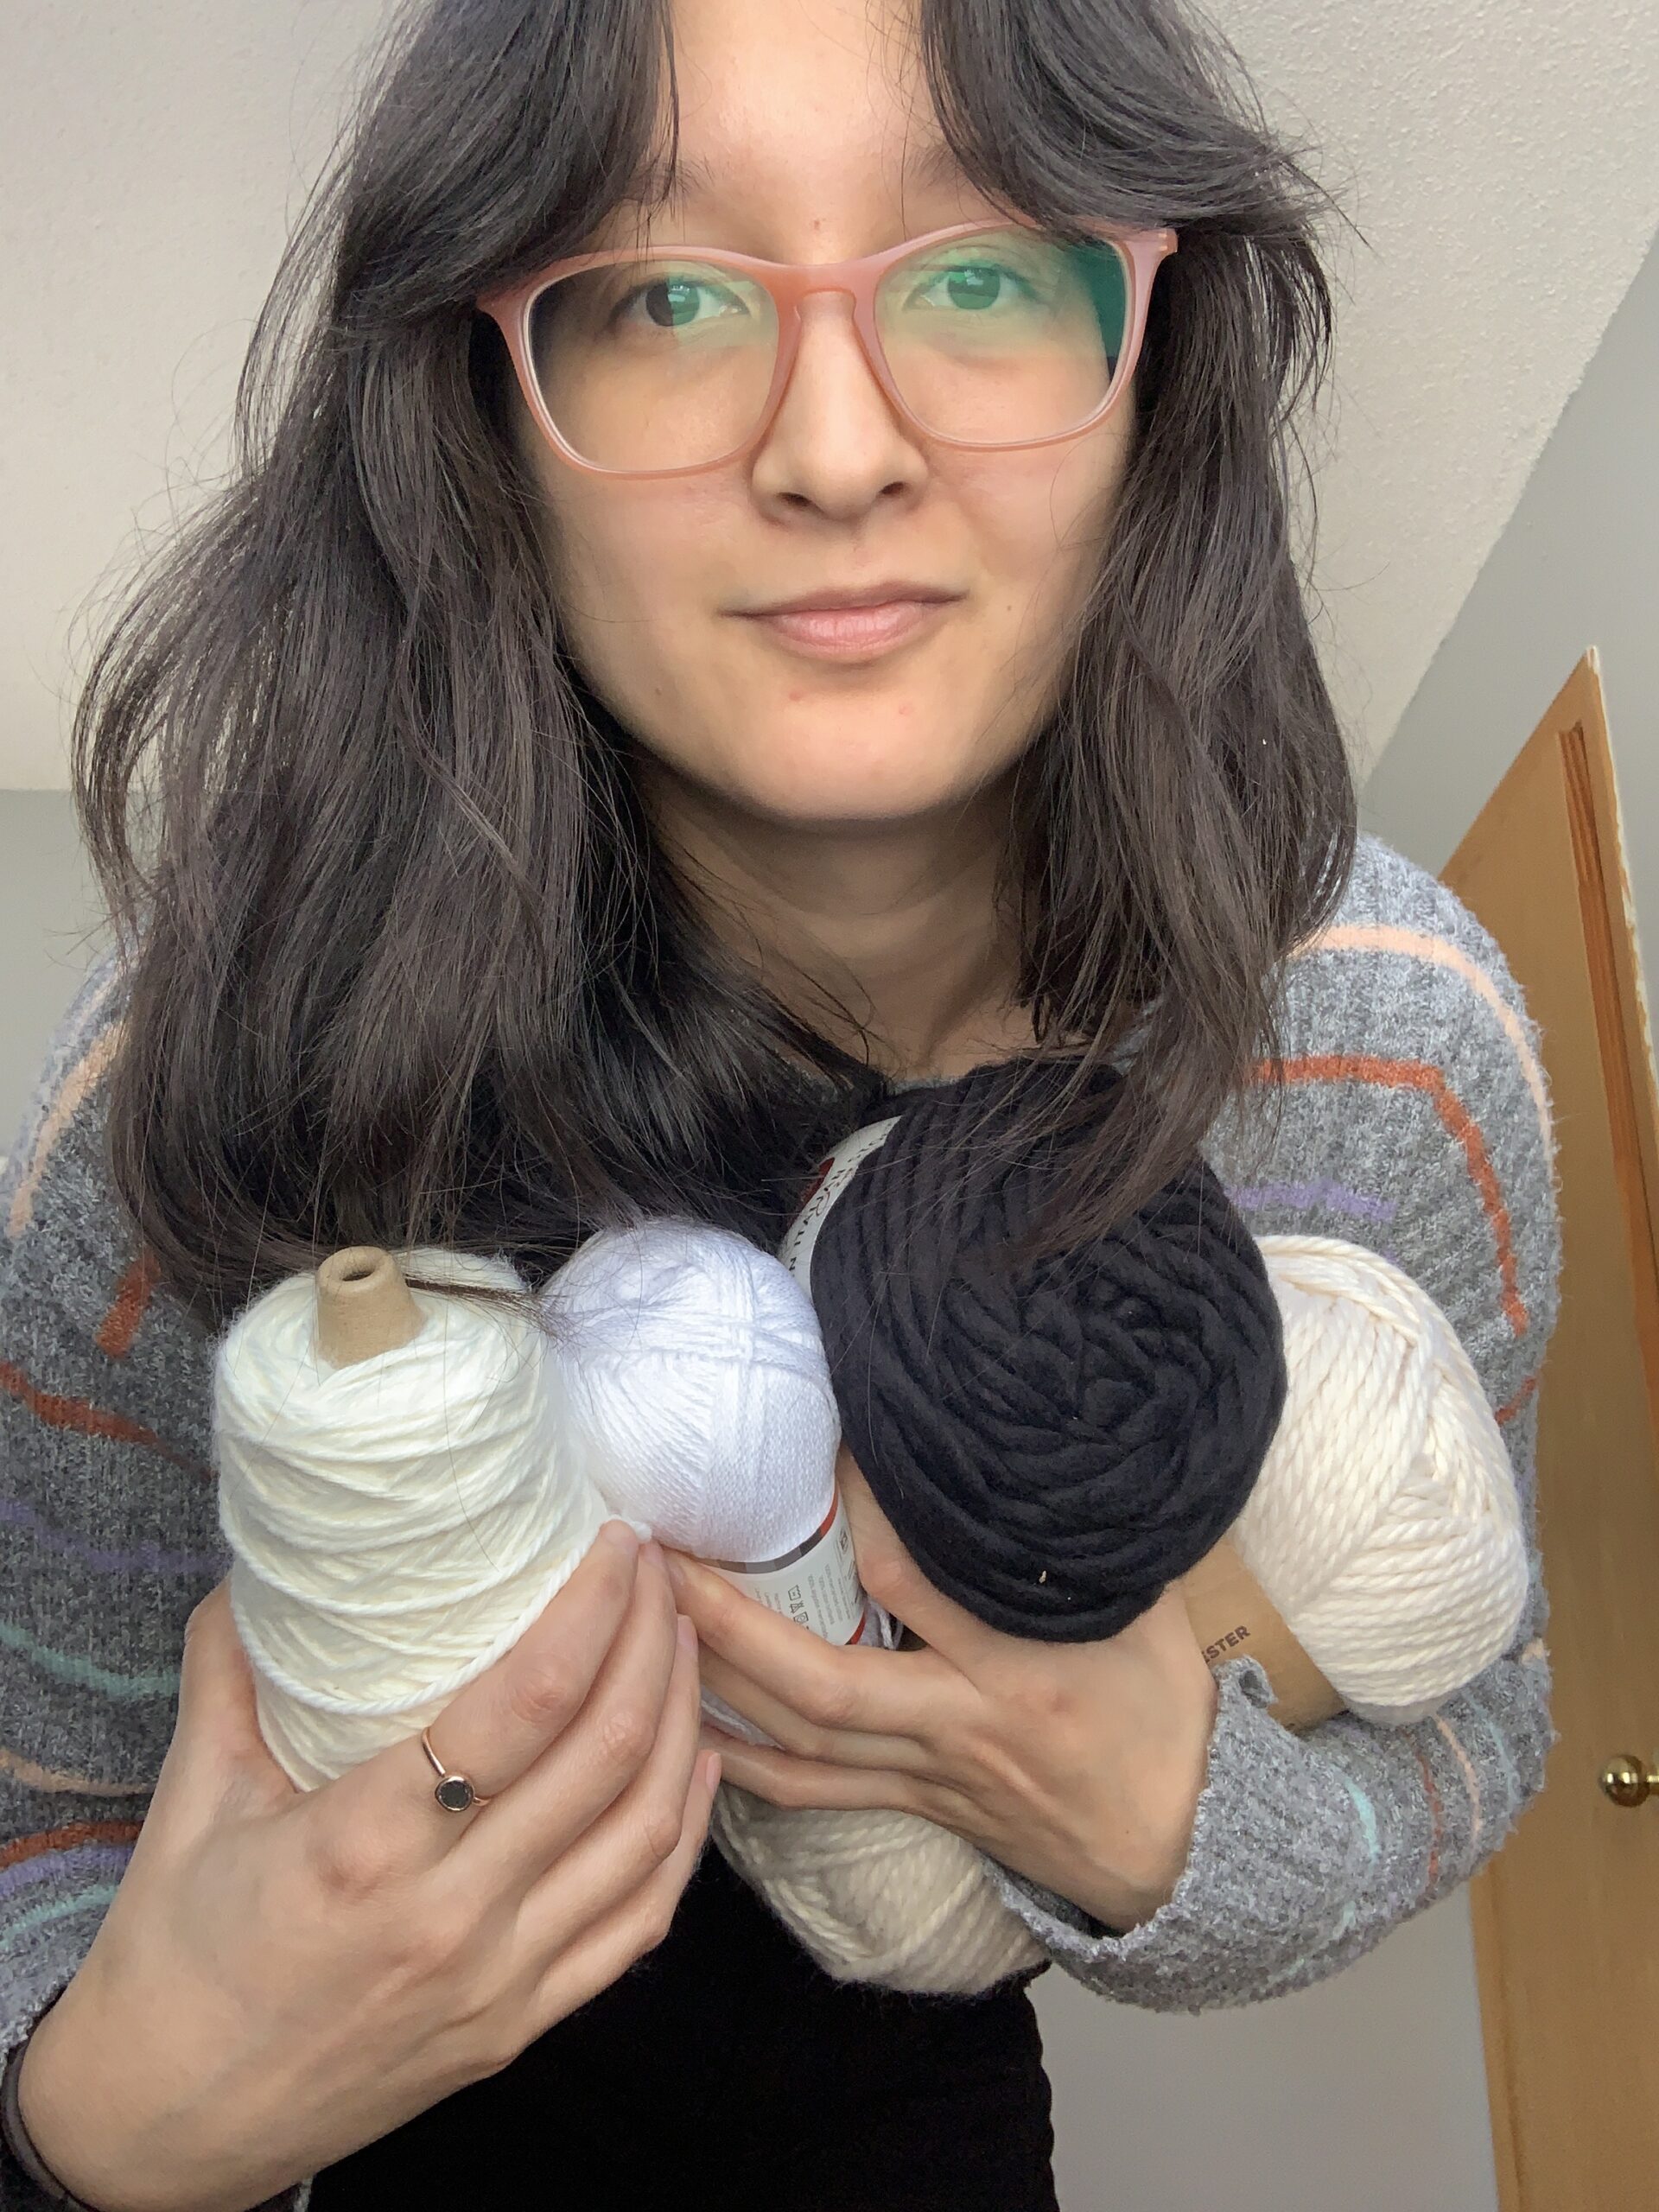 Nicole is a tan skinned Vietnamese American with shoulder length wavy hair with arms full of yarn skeins. They are wearing a striped sweater with pink square glasses and looking directly at the camera with a soft smile.